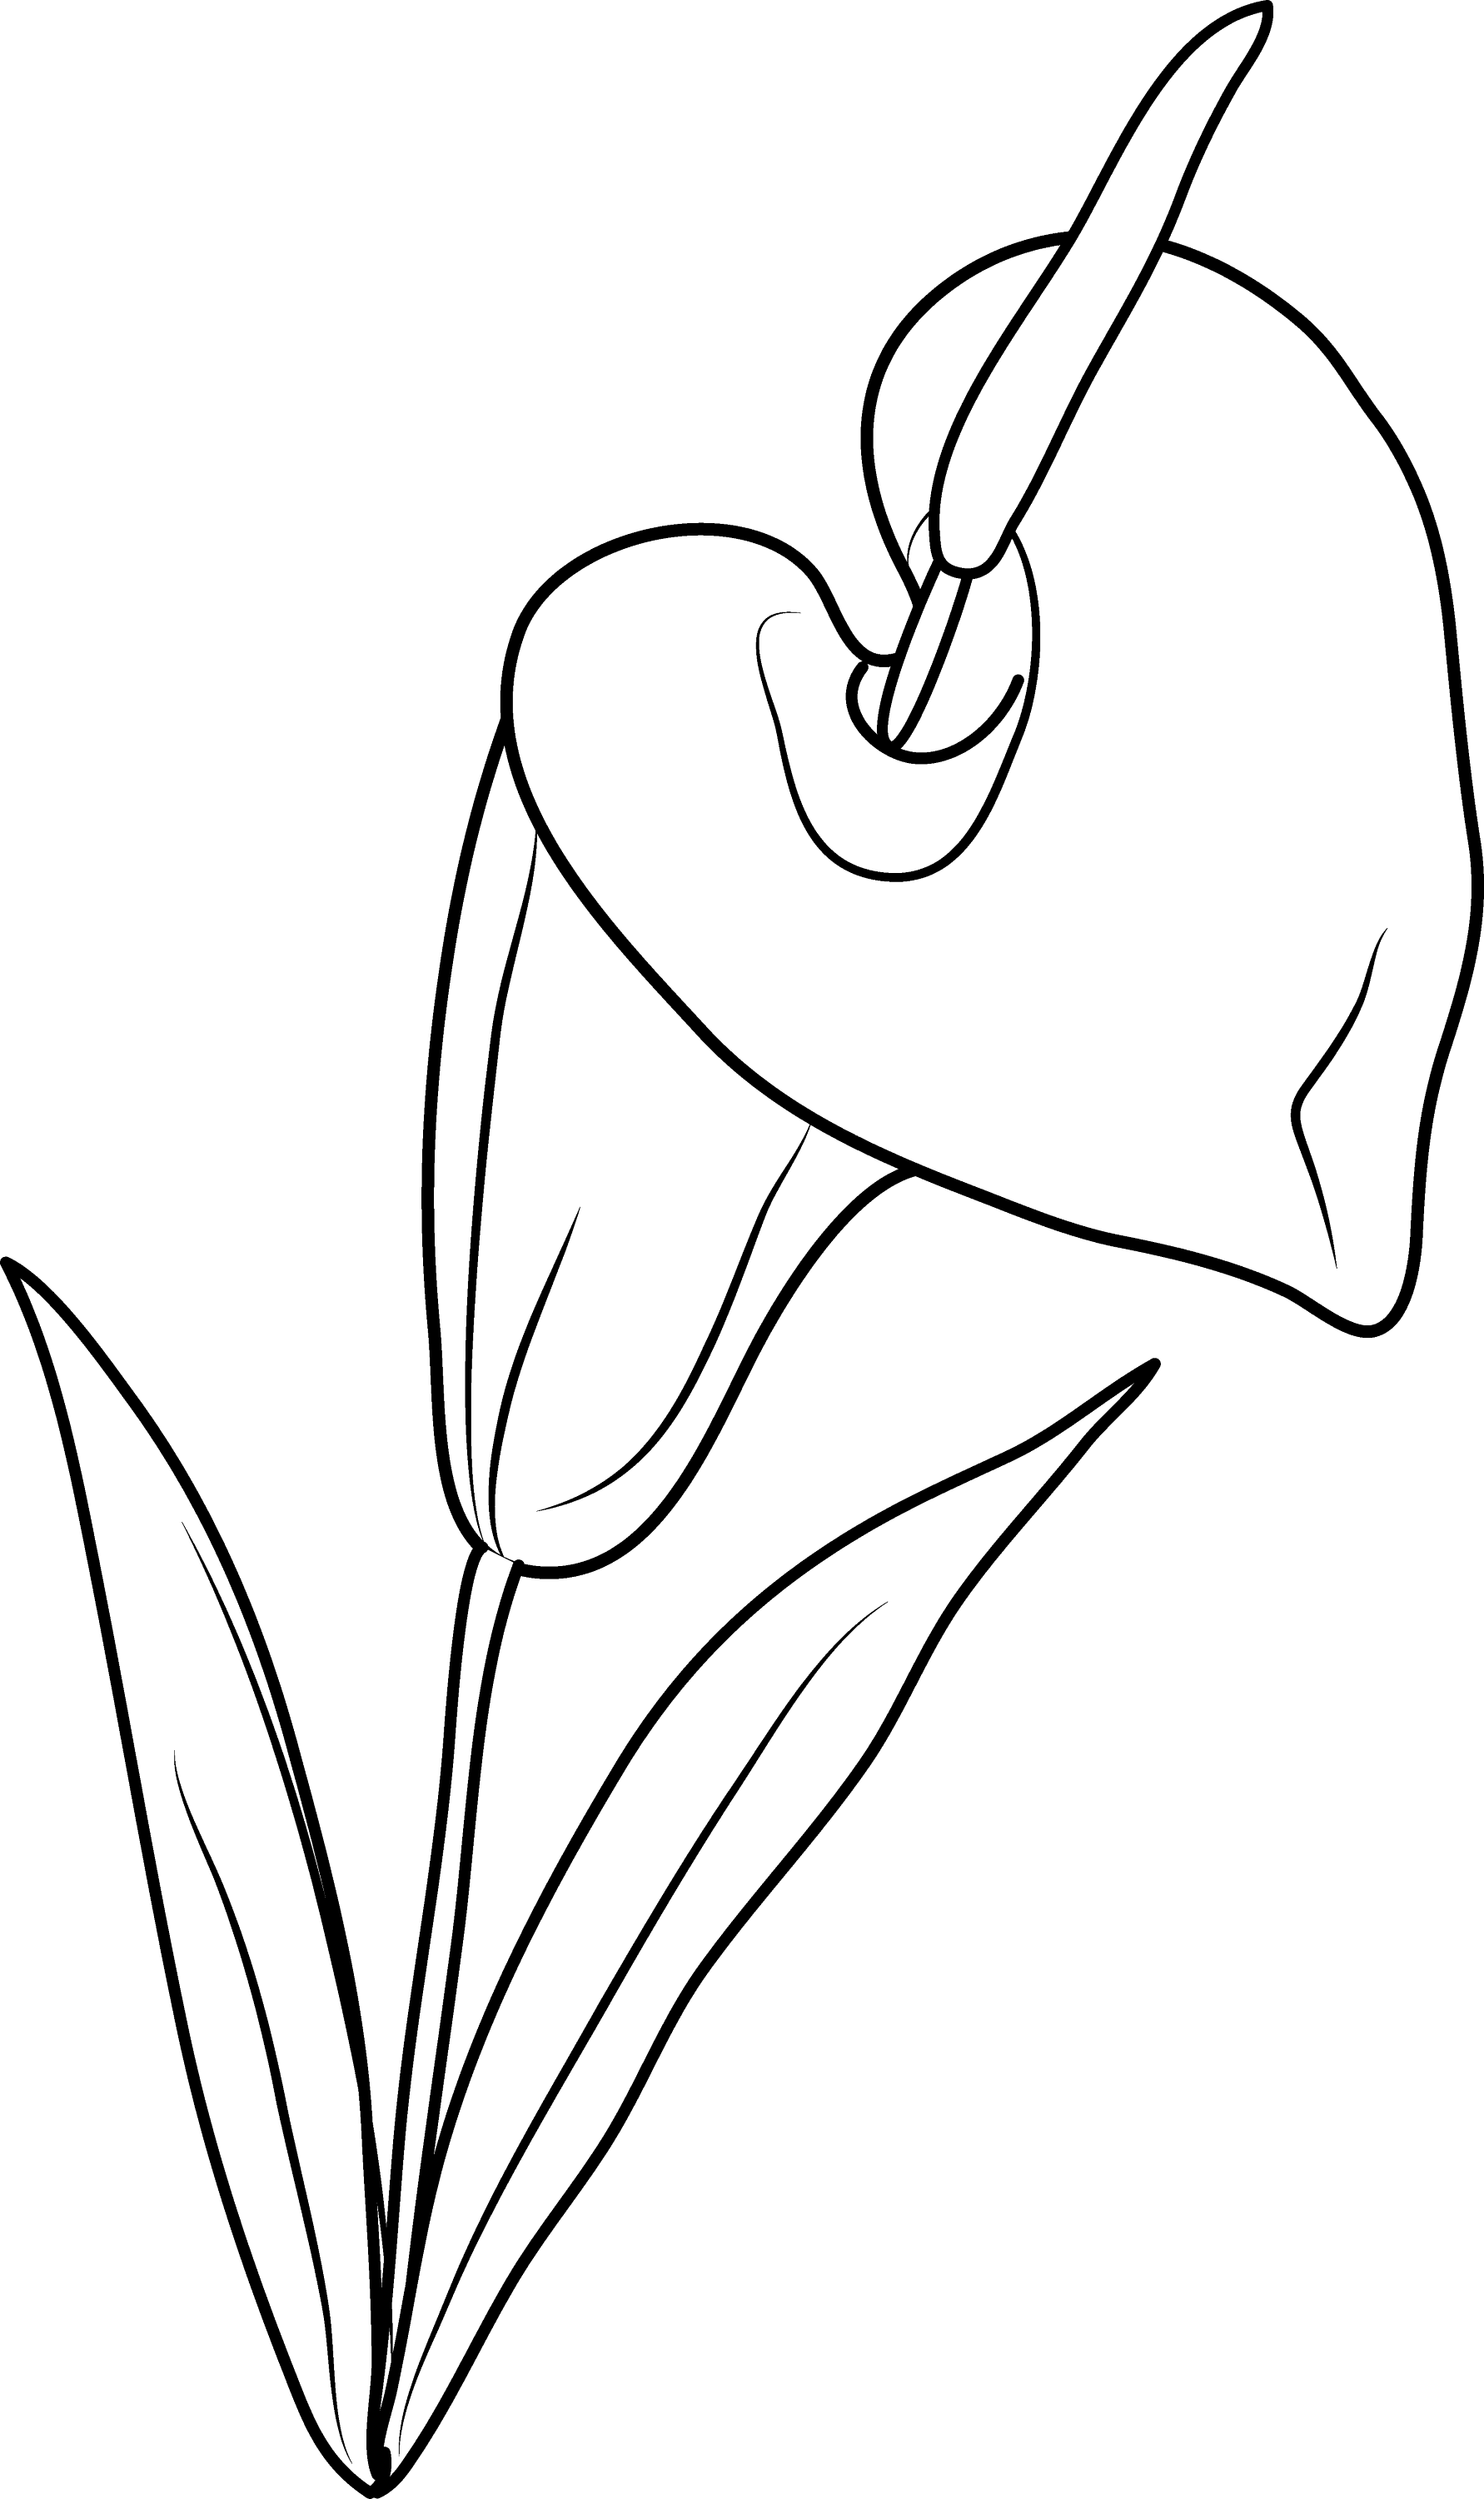 Lily Flower Coloring Page Free Clip Art